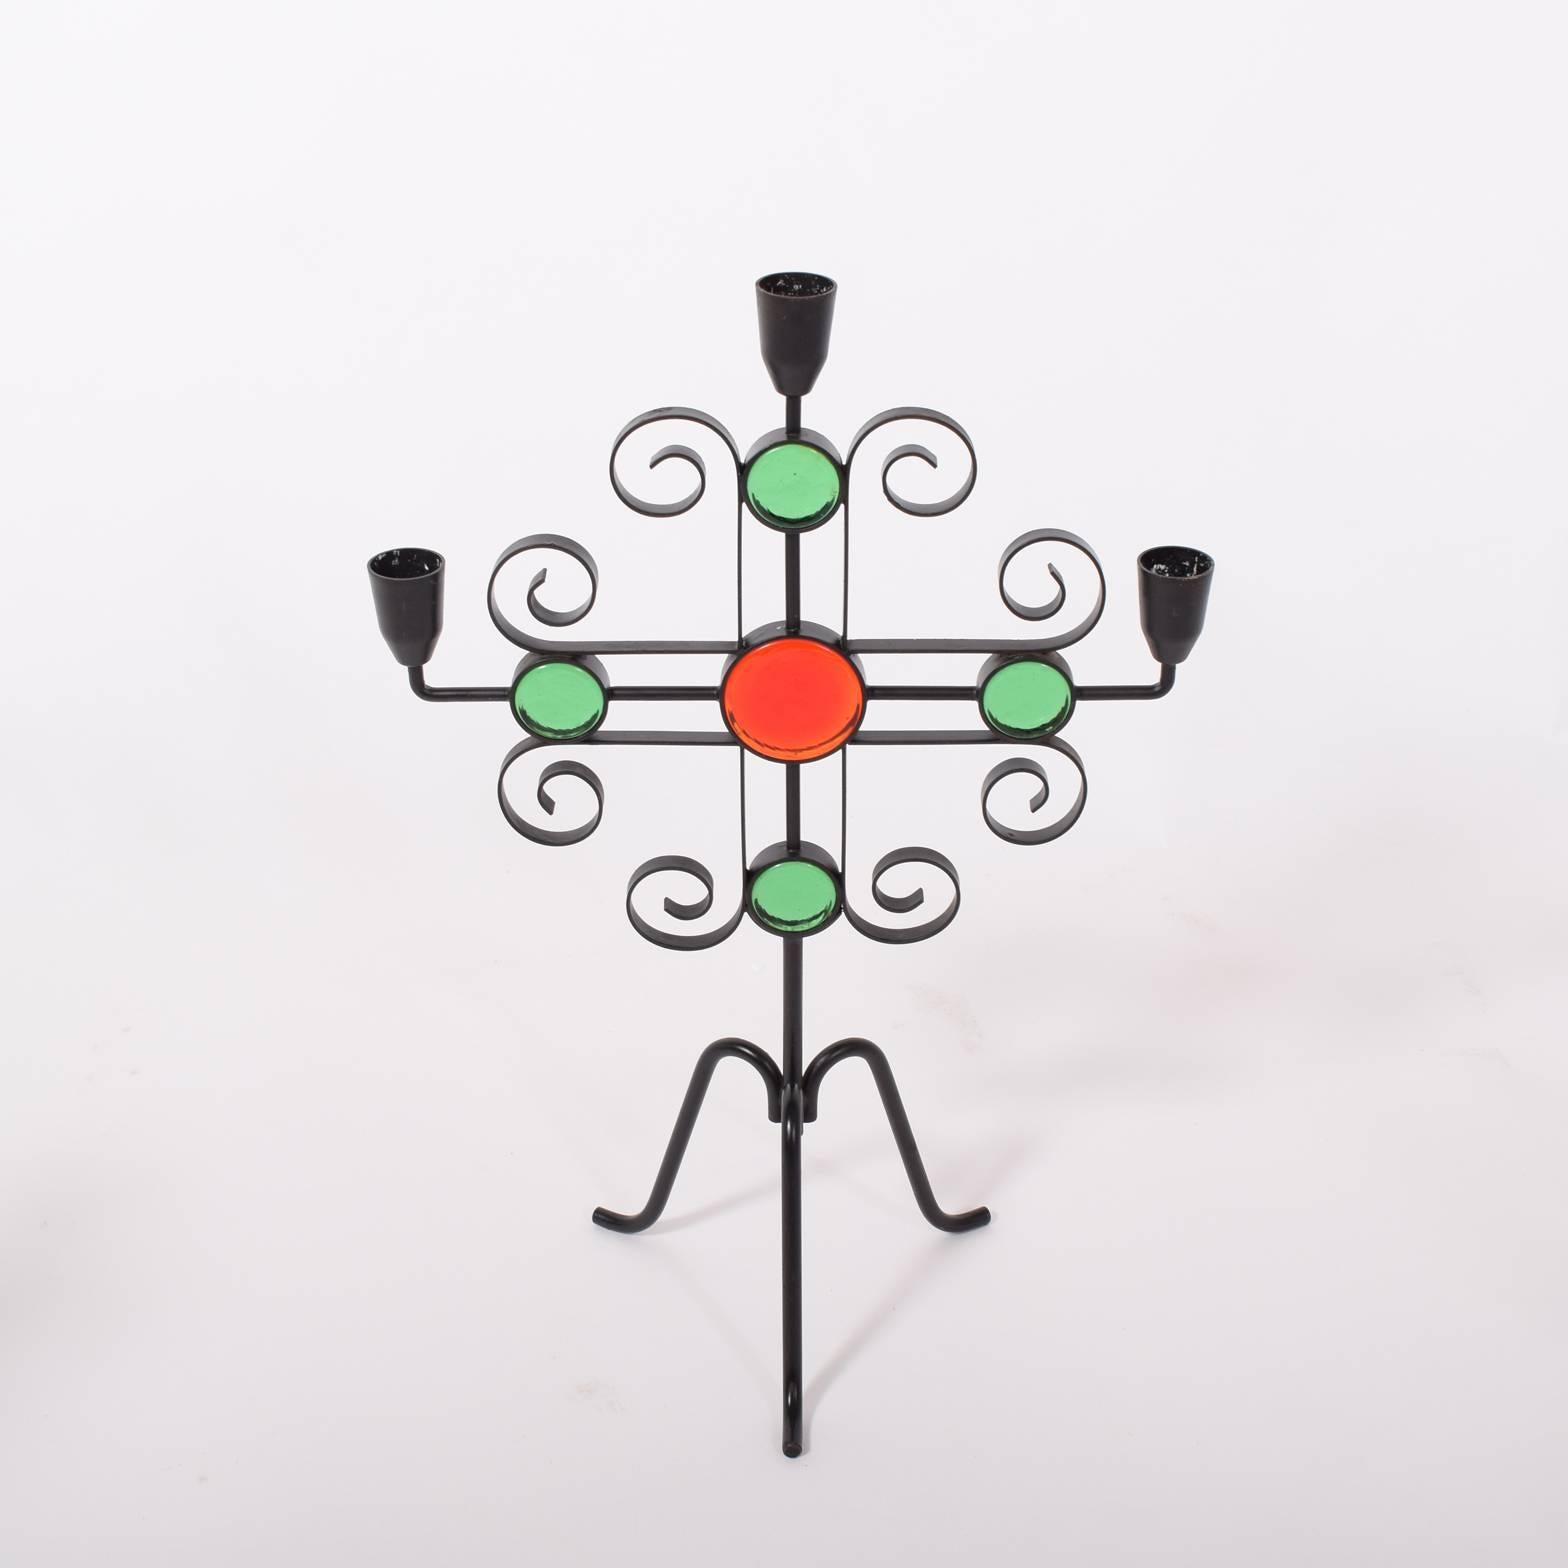 Black painted steel and glass candelabras designed in the 1960s by Gunnar Ander made by Ystad Metal co.